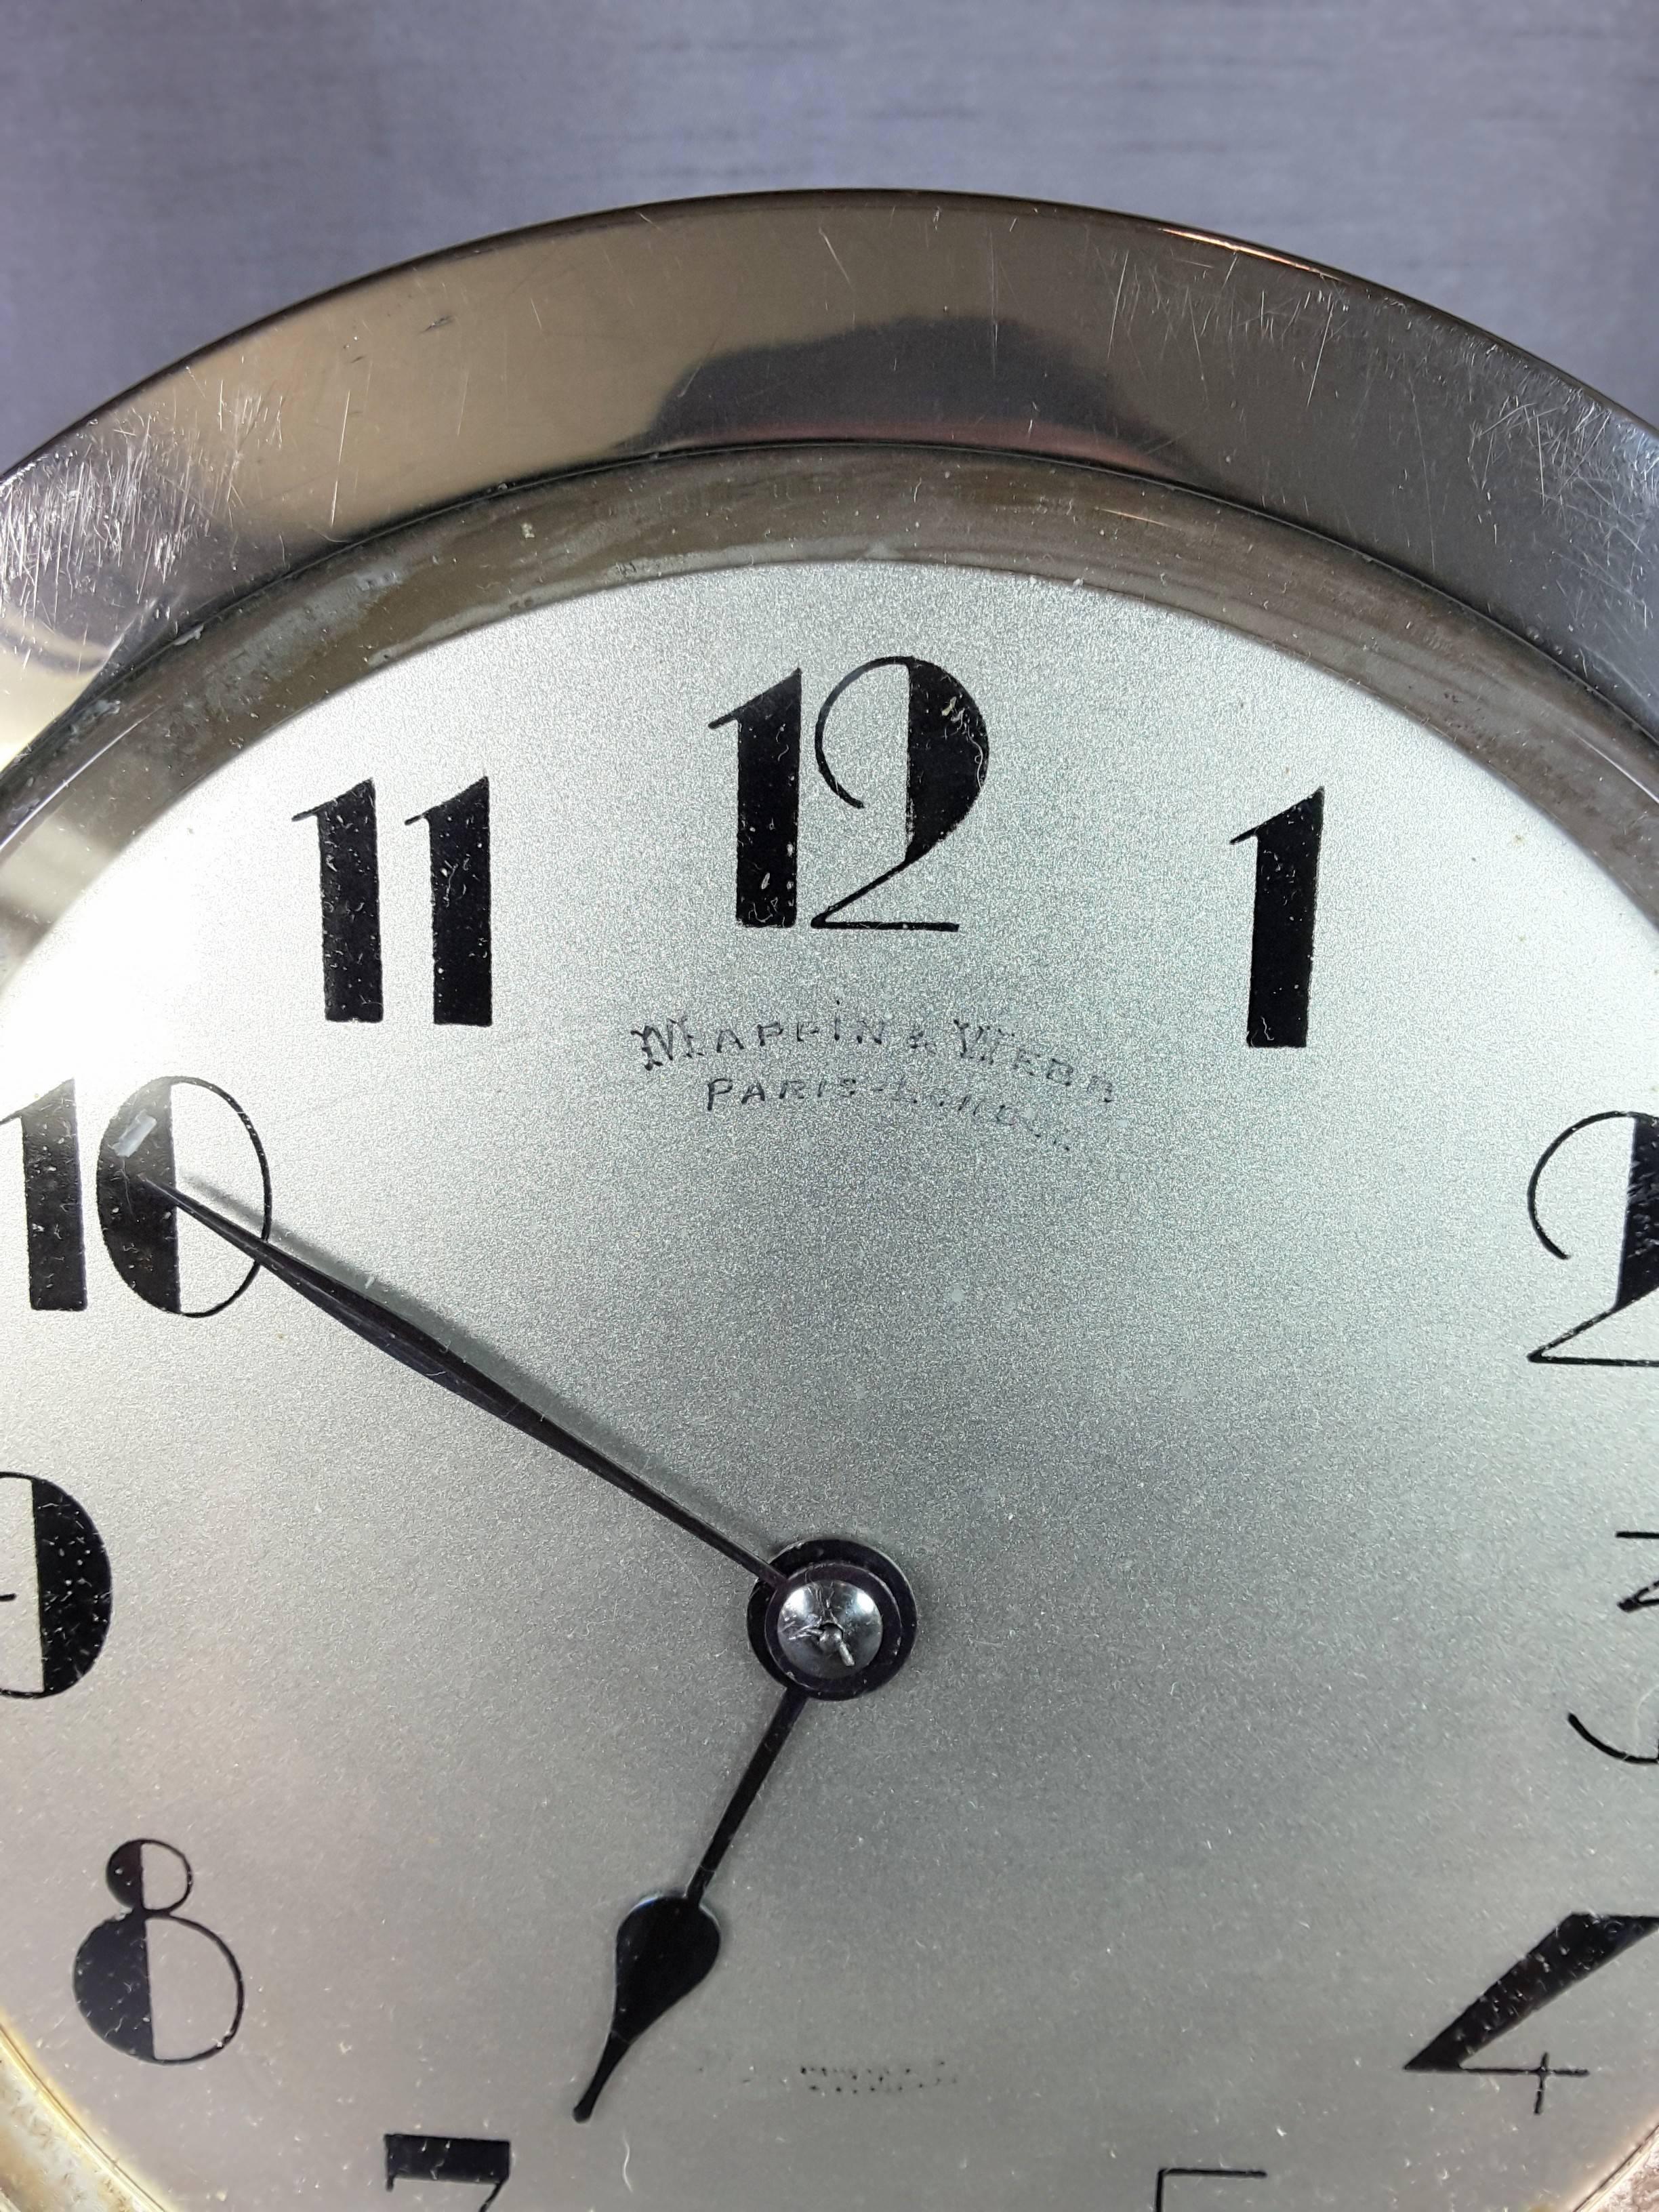 An Art Deco Mappin & Webb Paris-London large circular desk clock, with a painted black number dial on a silvered face, marked Mappin & Webb Paris-London under the 12 and under the 6 it is marked Made in France, the face and name is showing wear on